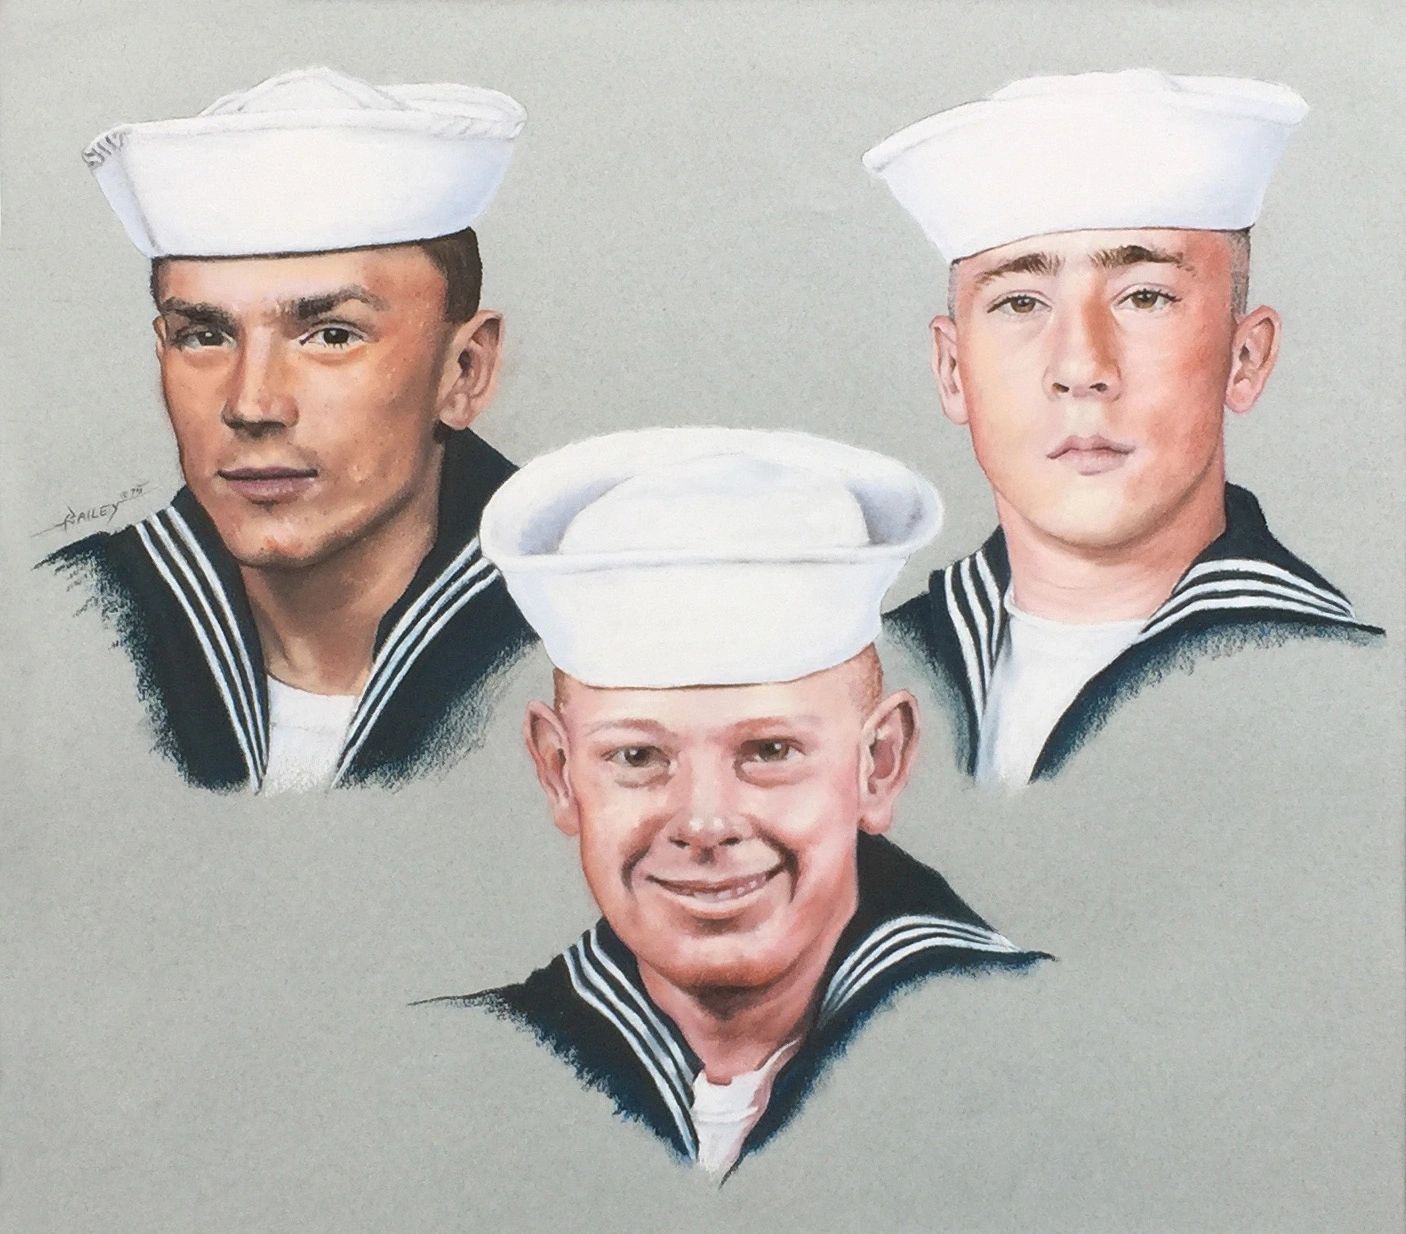 A pastel portrait of three sailor's faces in a triangle composition. A father and two sons.